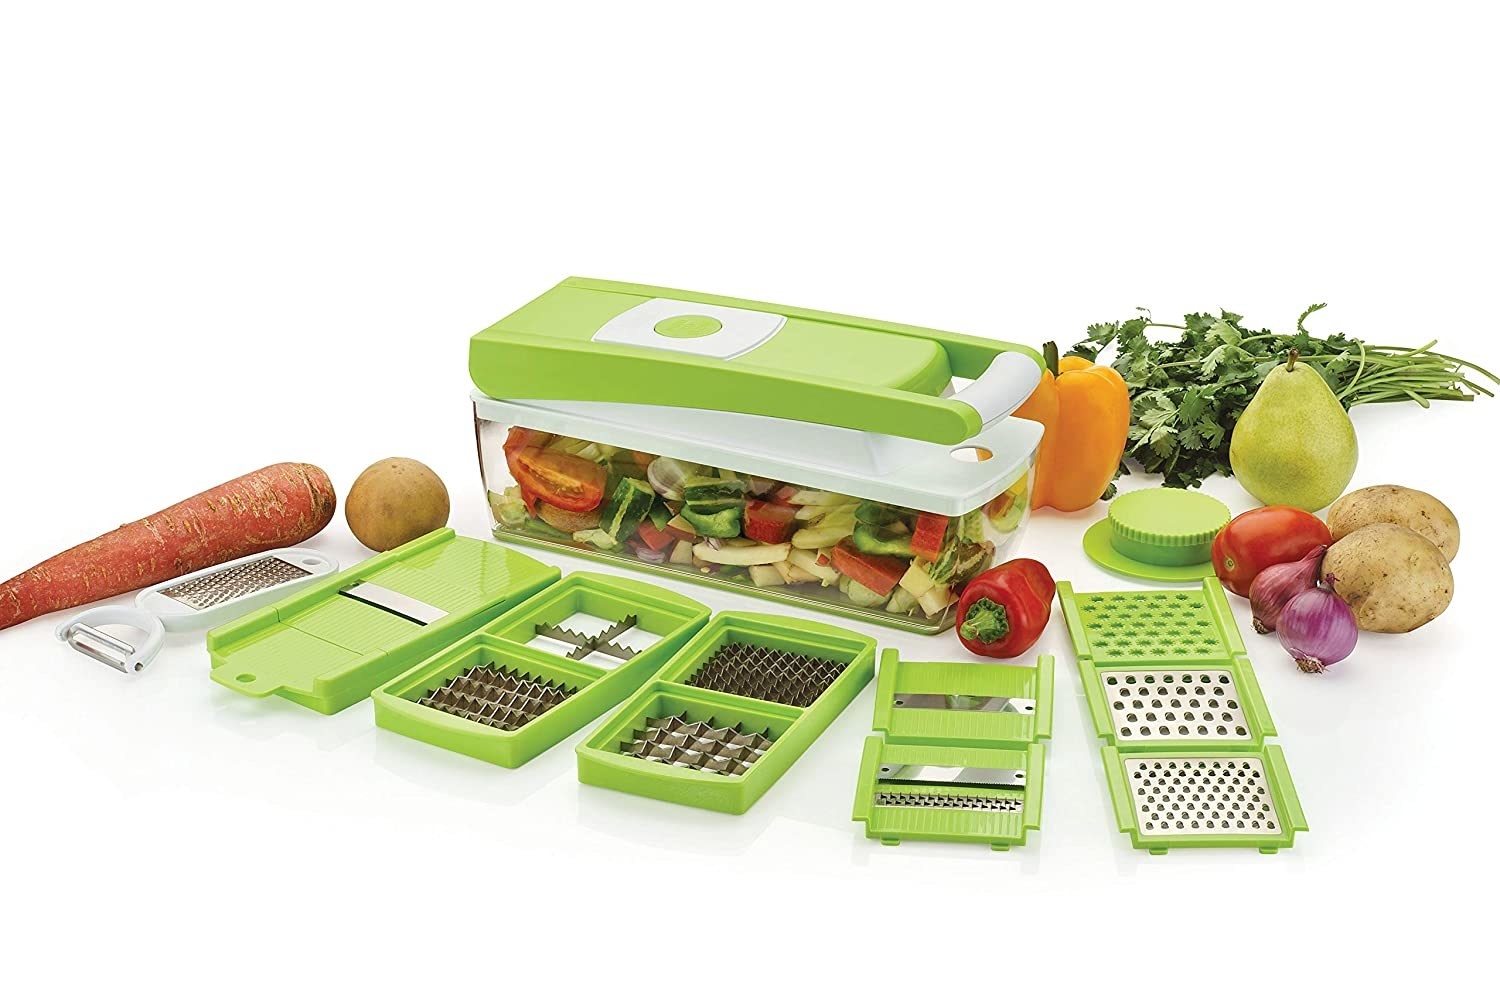 A vegetable chopper with various vegetables